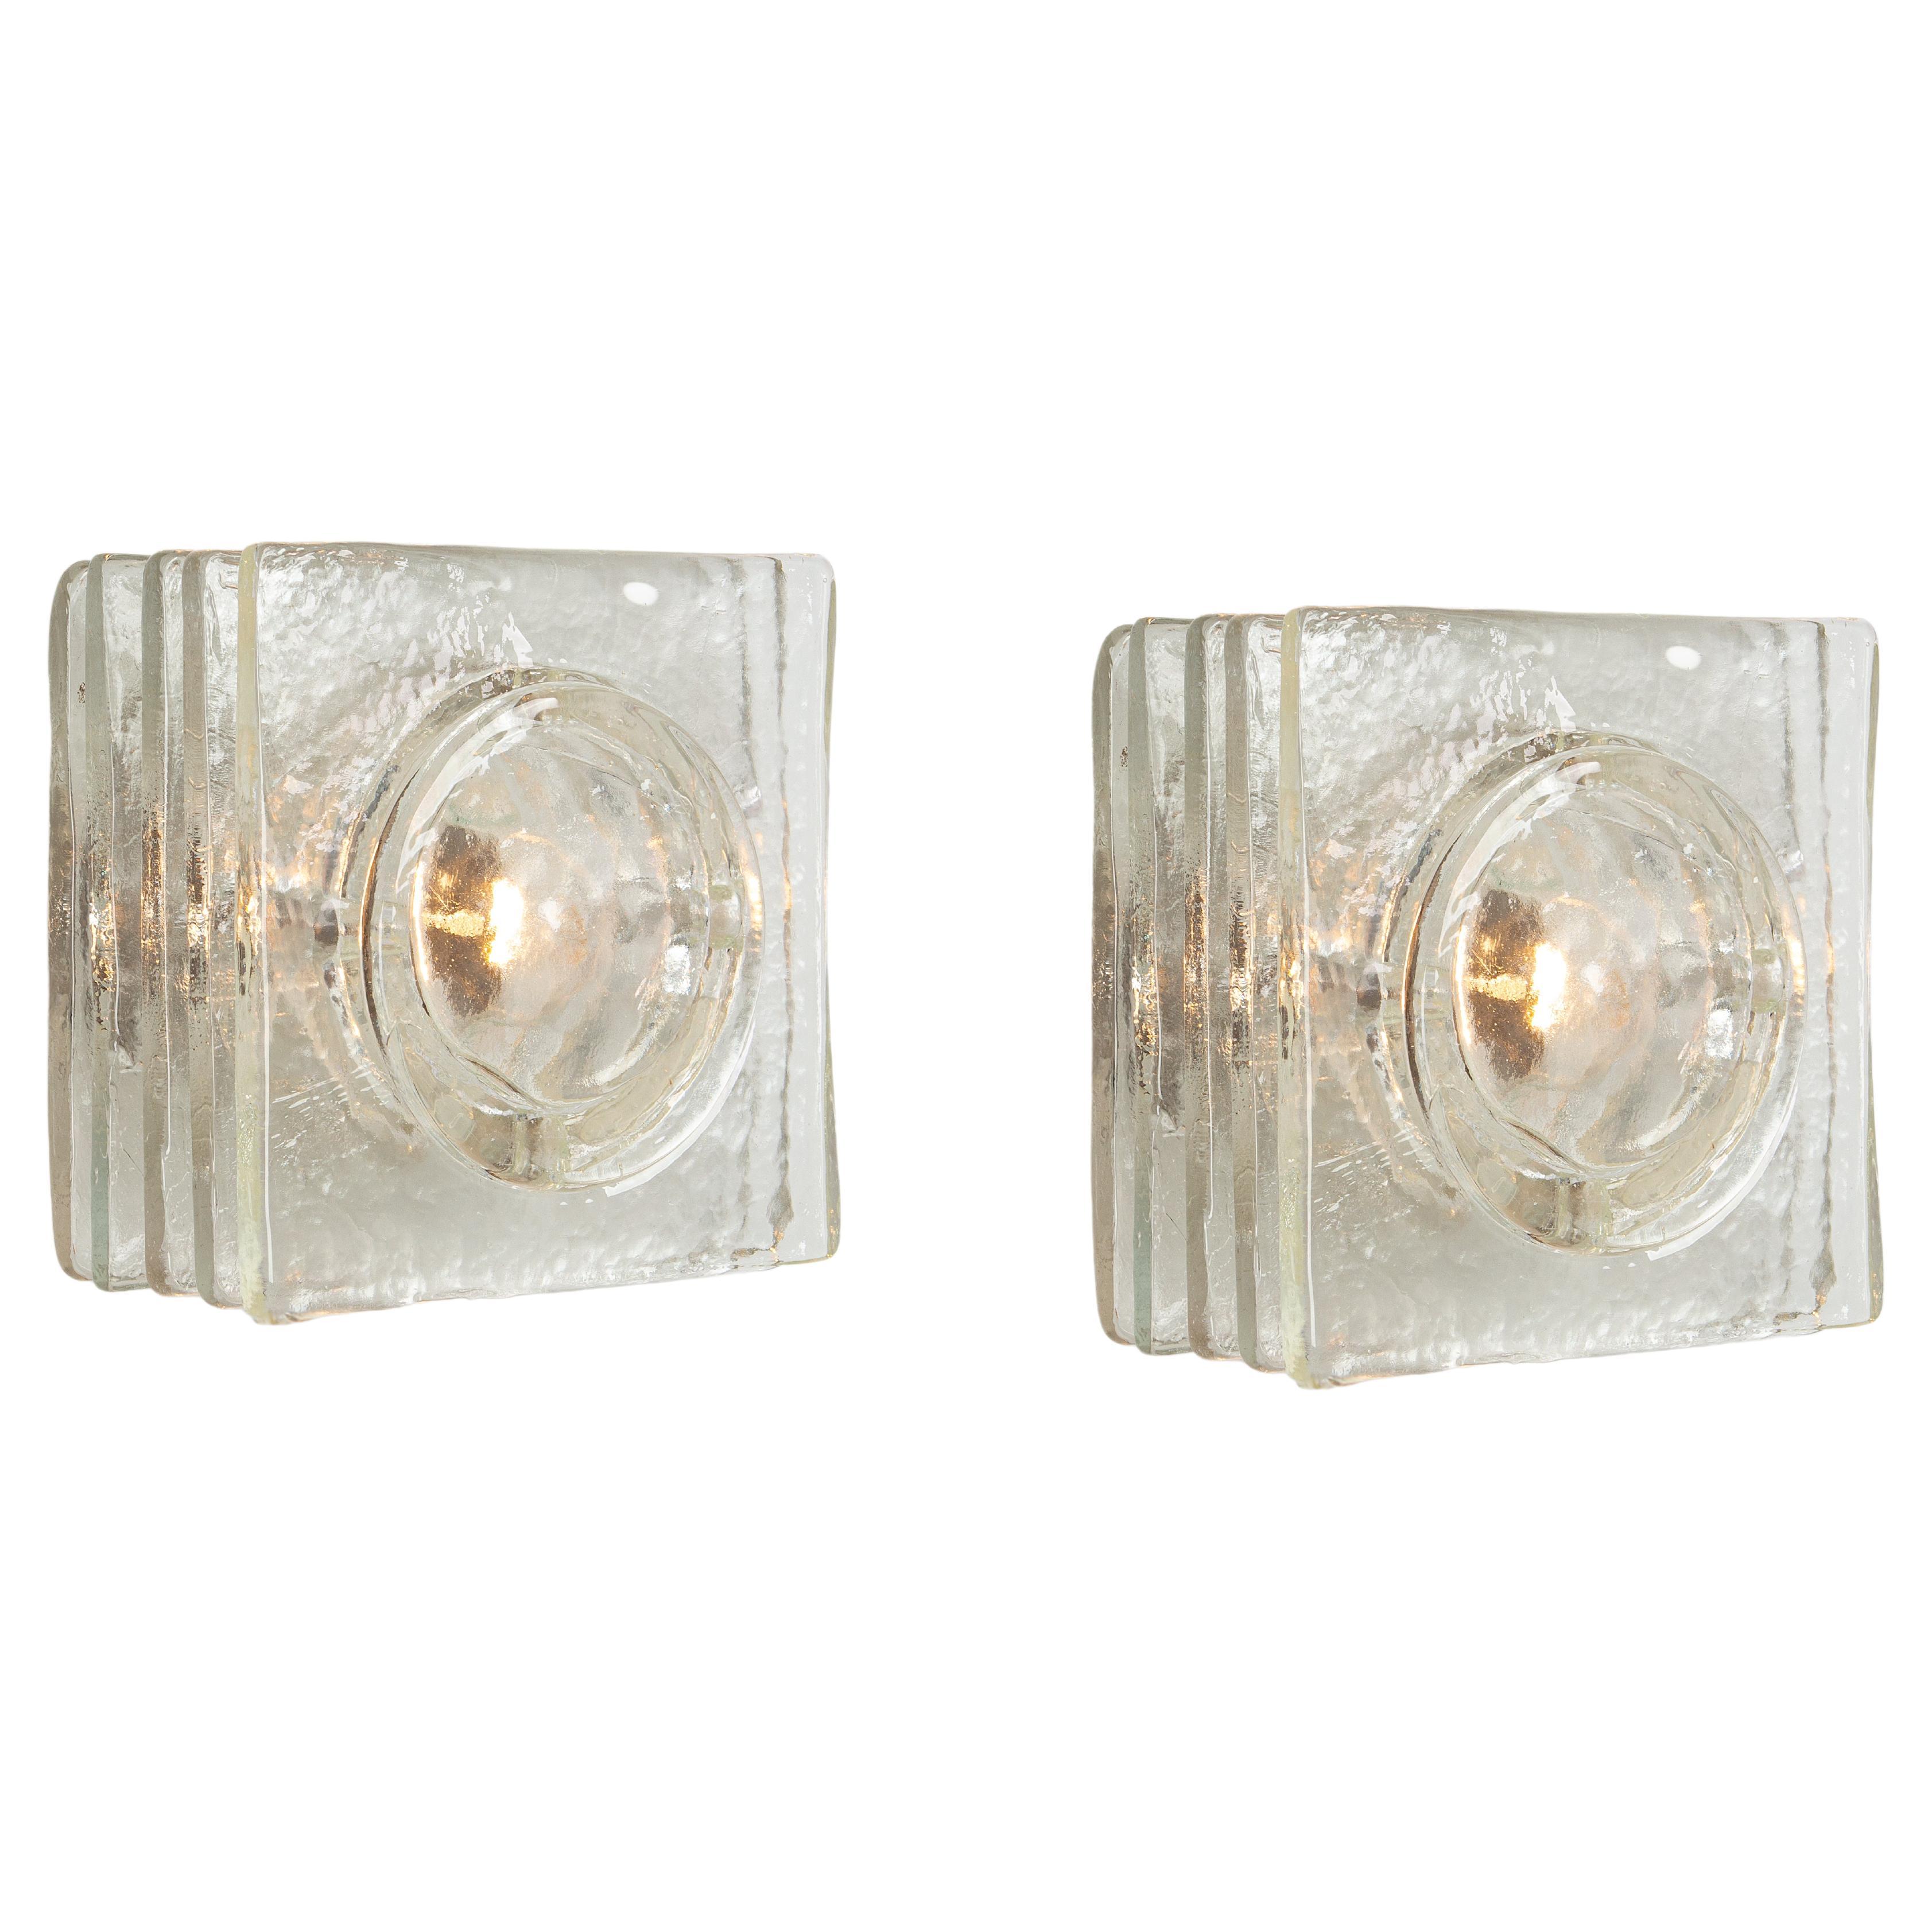 Pair of Cubic Mid-Century Wall Sconce in style of Poliarte, 1970s For Sale